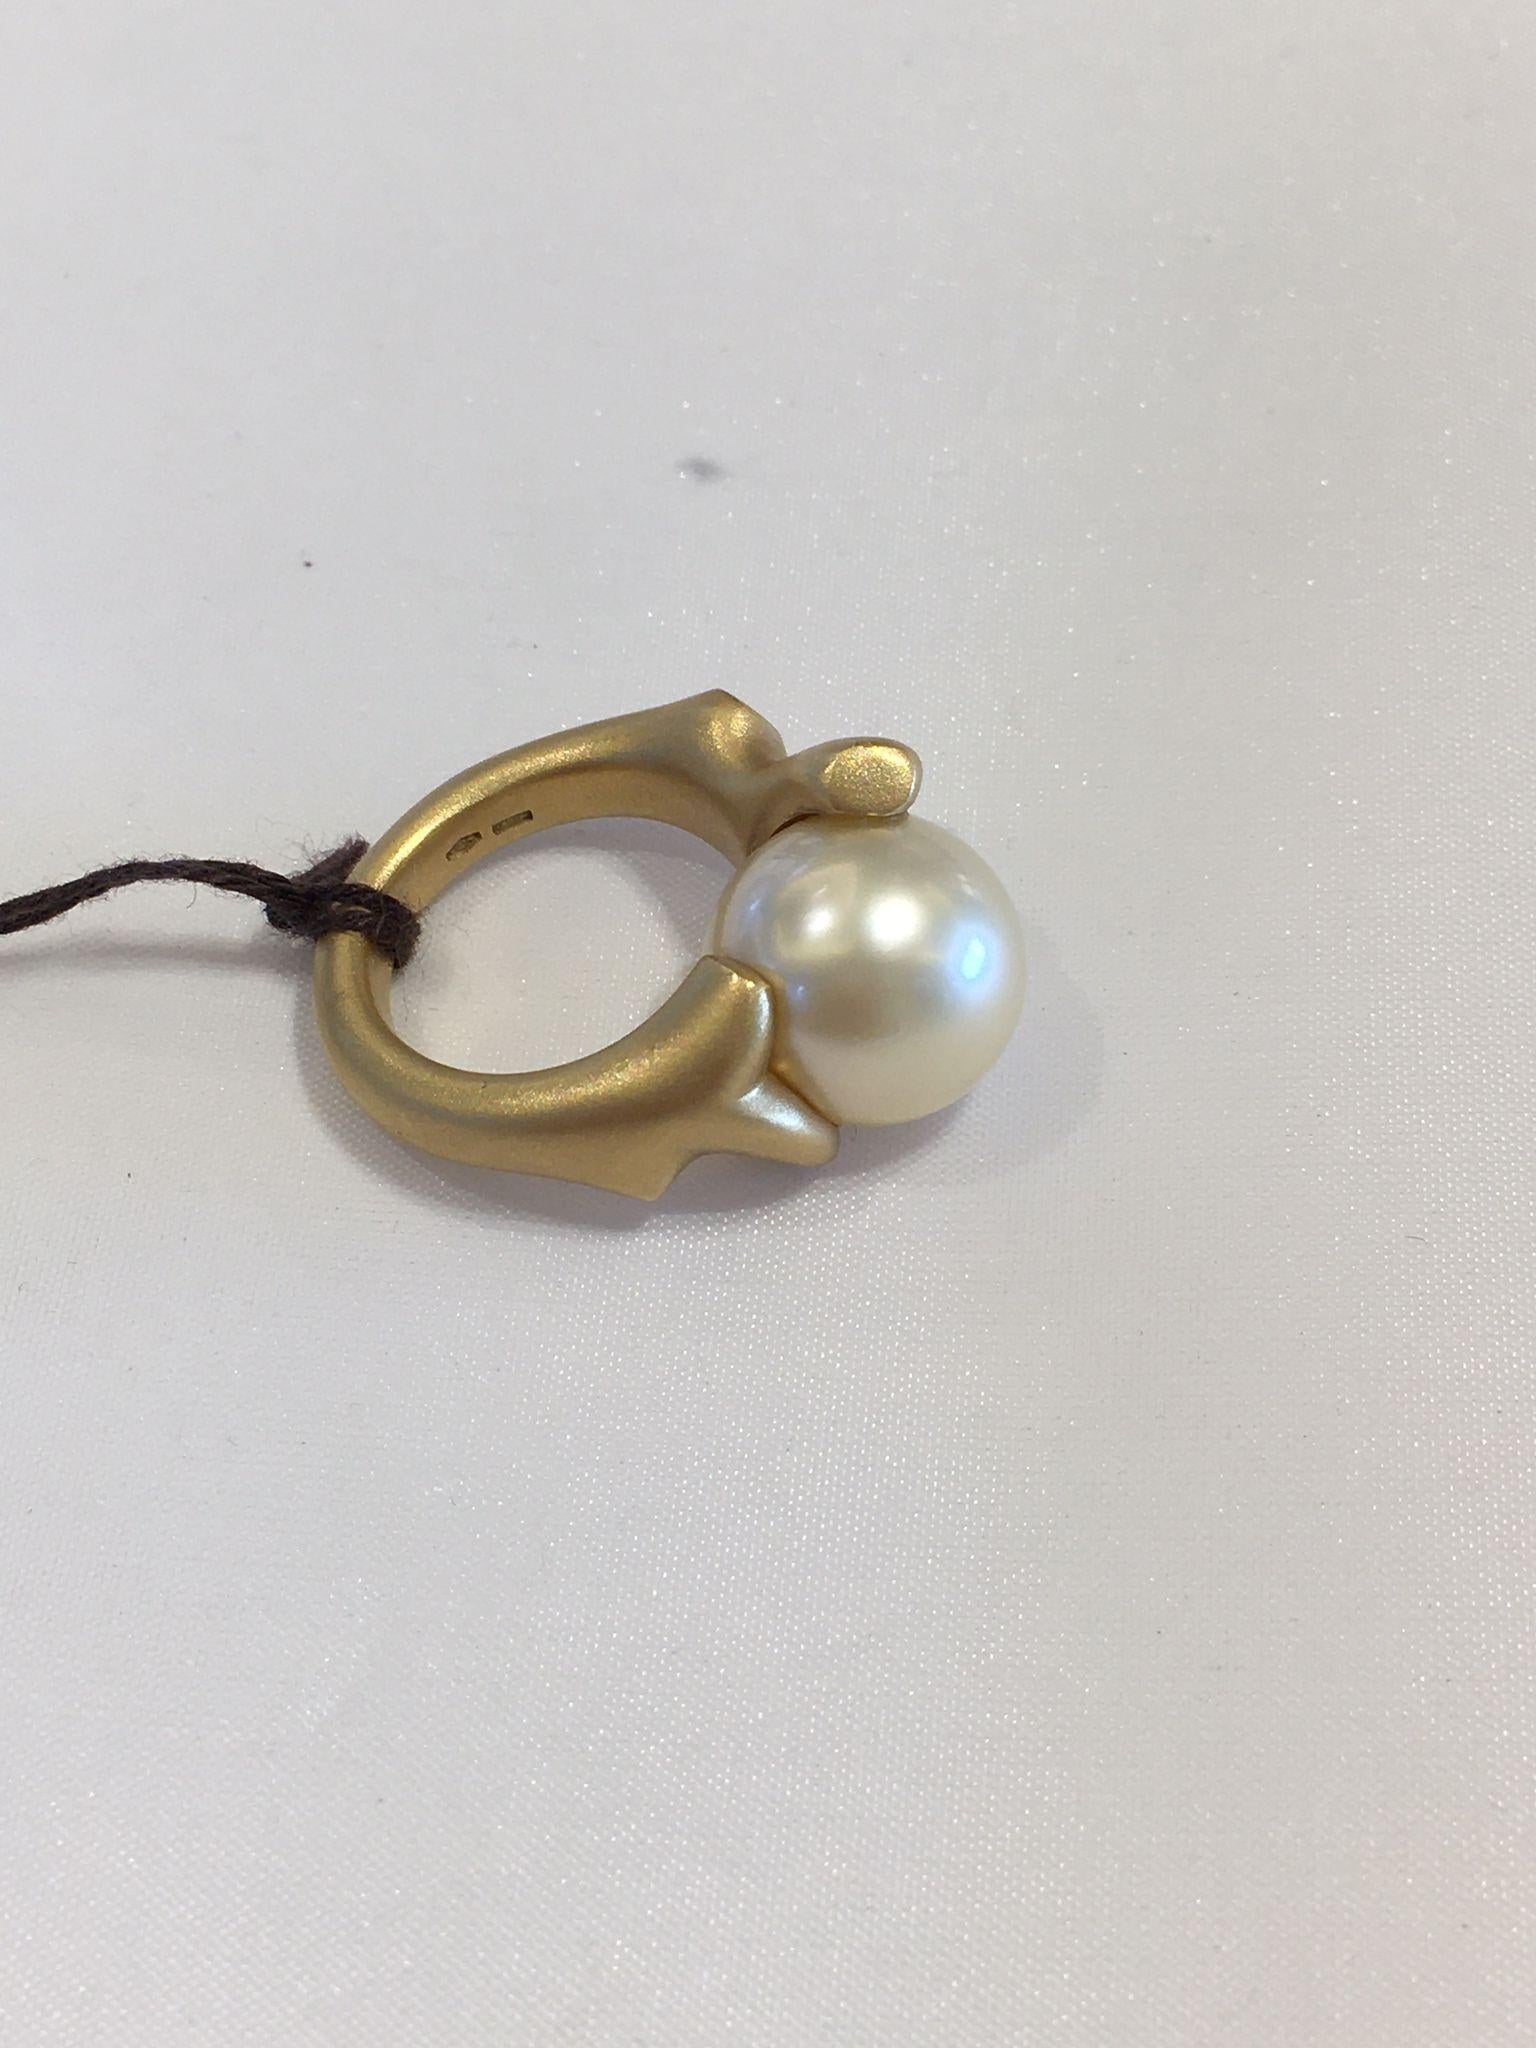 Neoclassical A brush 18kt yellow gold ring with a 5+ plus South Sea light pearl. For Sale